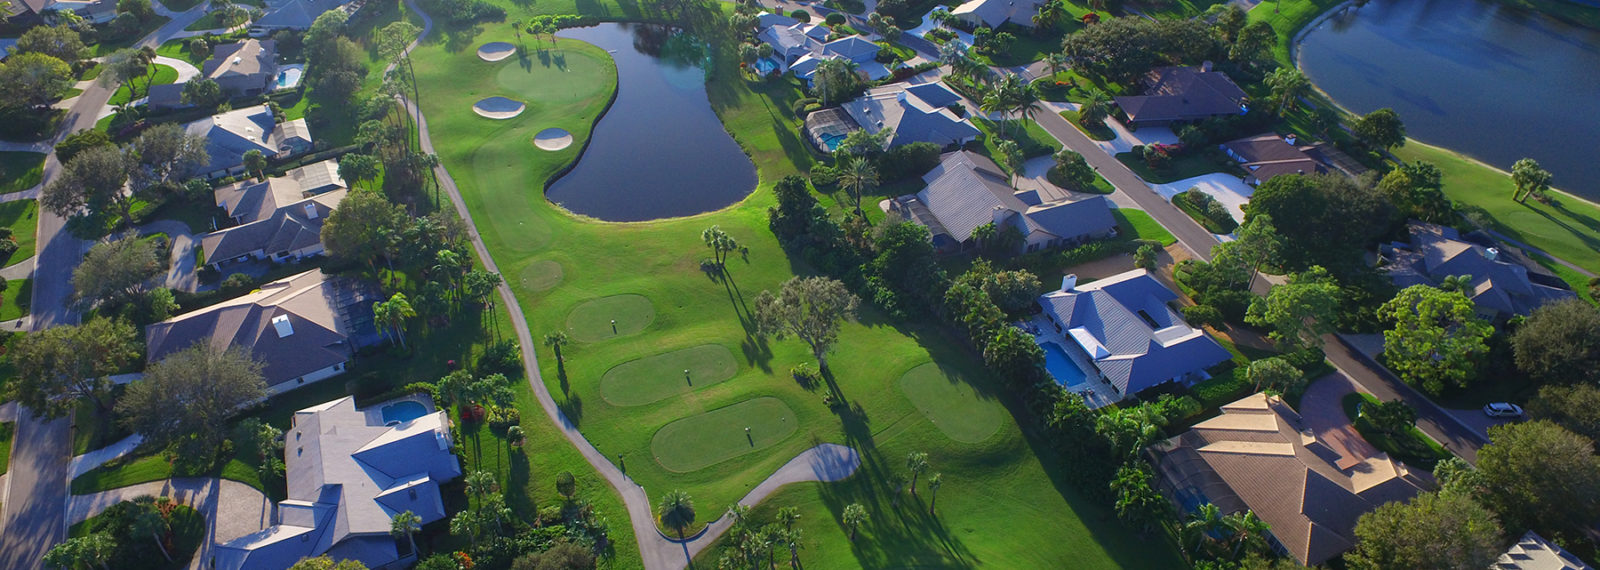 10 Things You Should Know When Buying a Golf Home in Mariner Sands, Stuart, FL